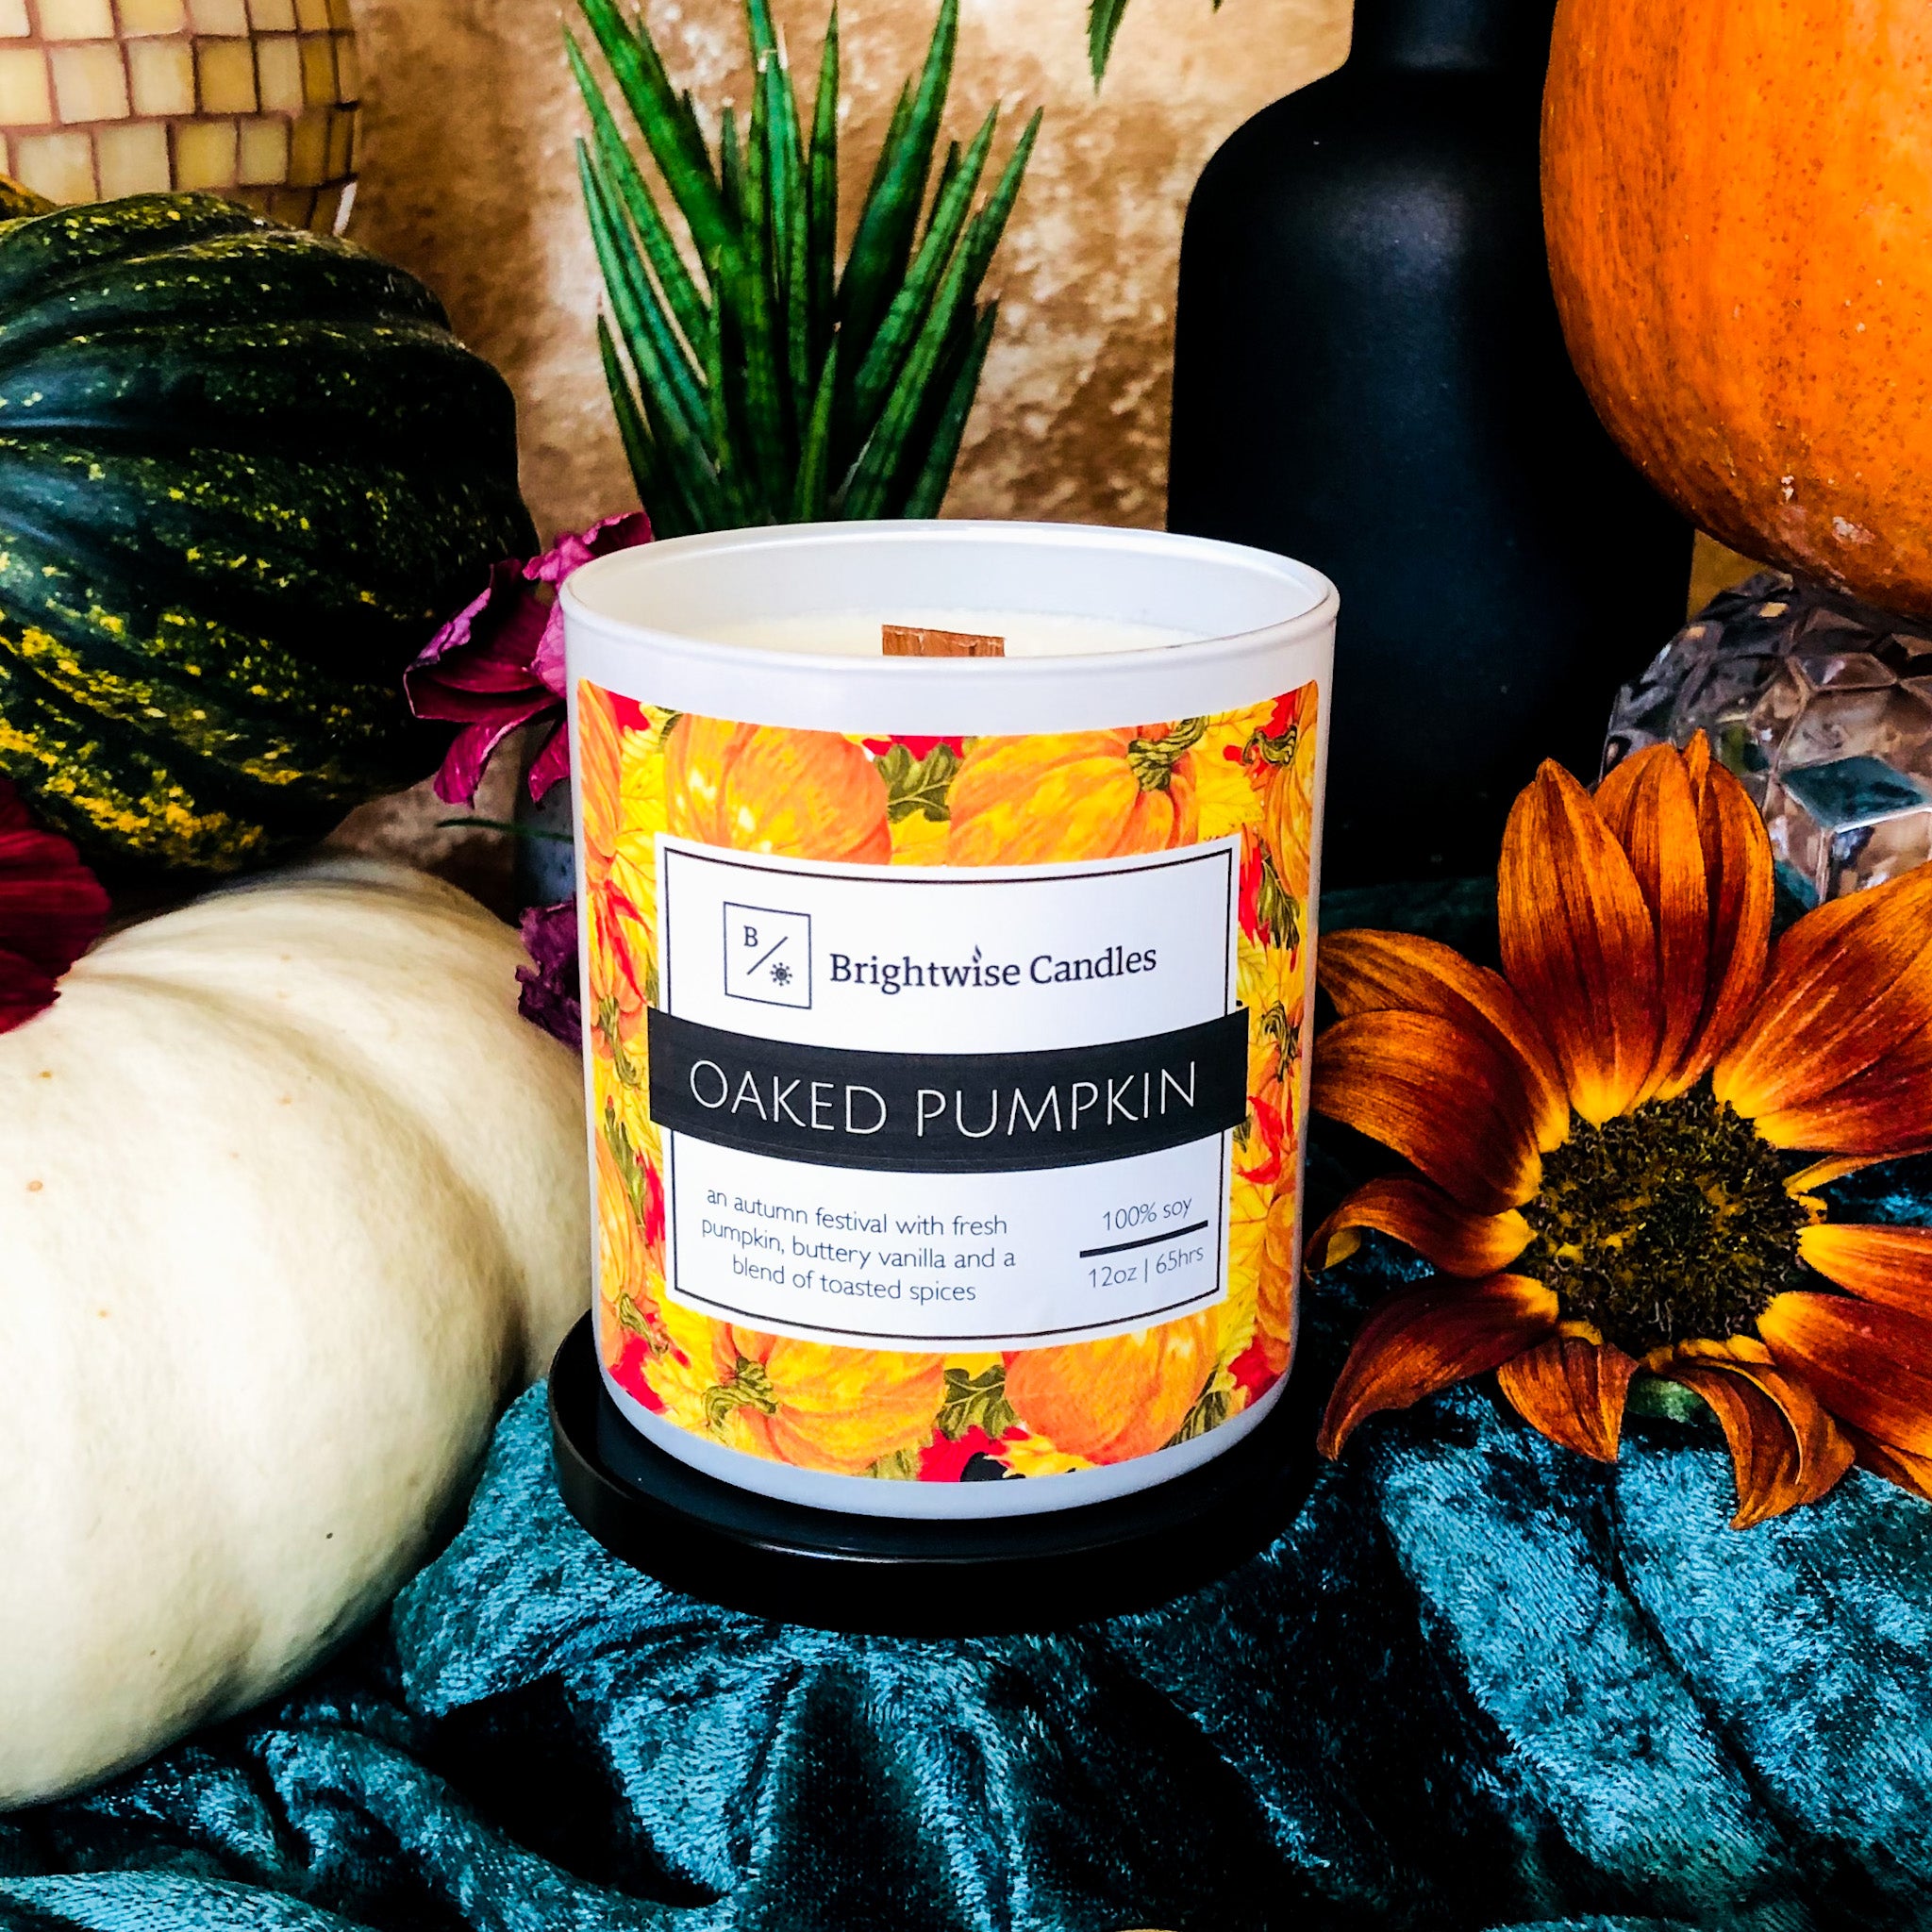 Oaked Pumpkin Scented Soy Wax Candle - Brightwise Candles